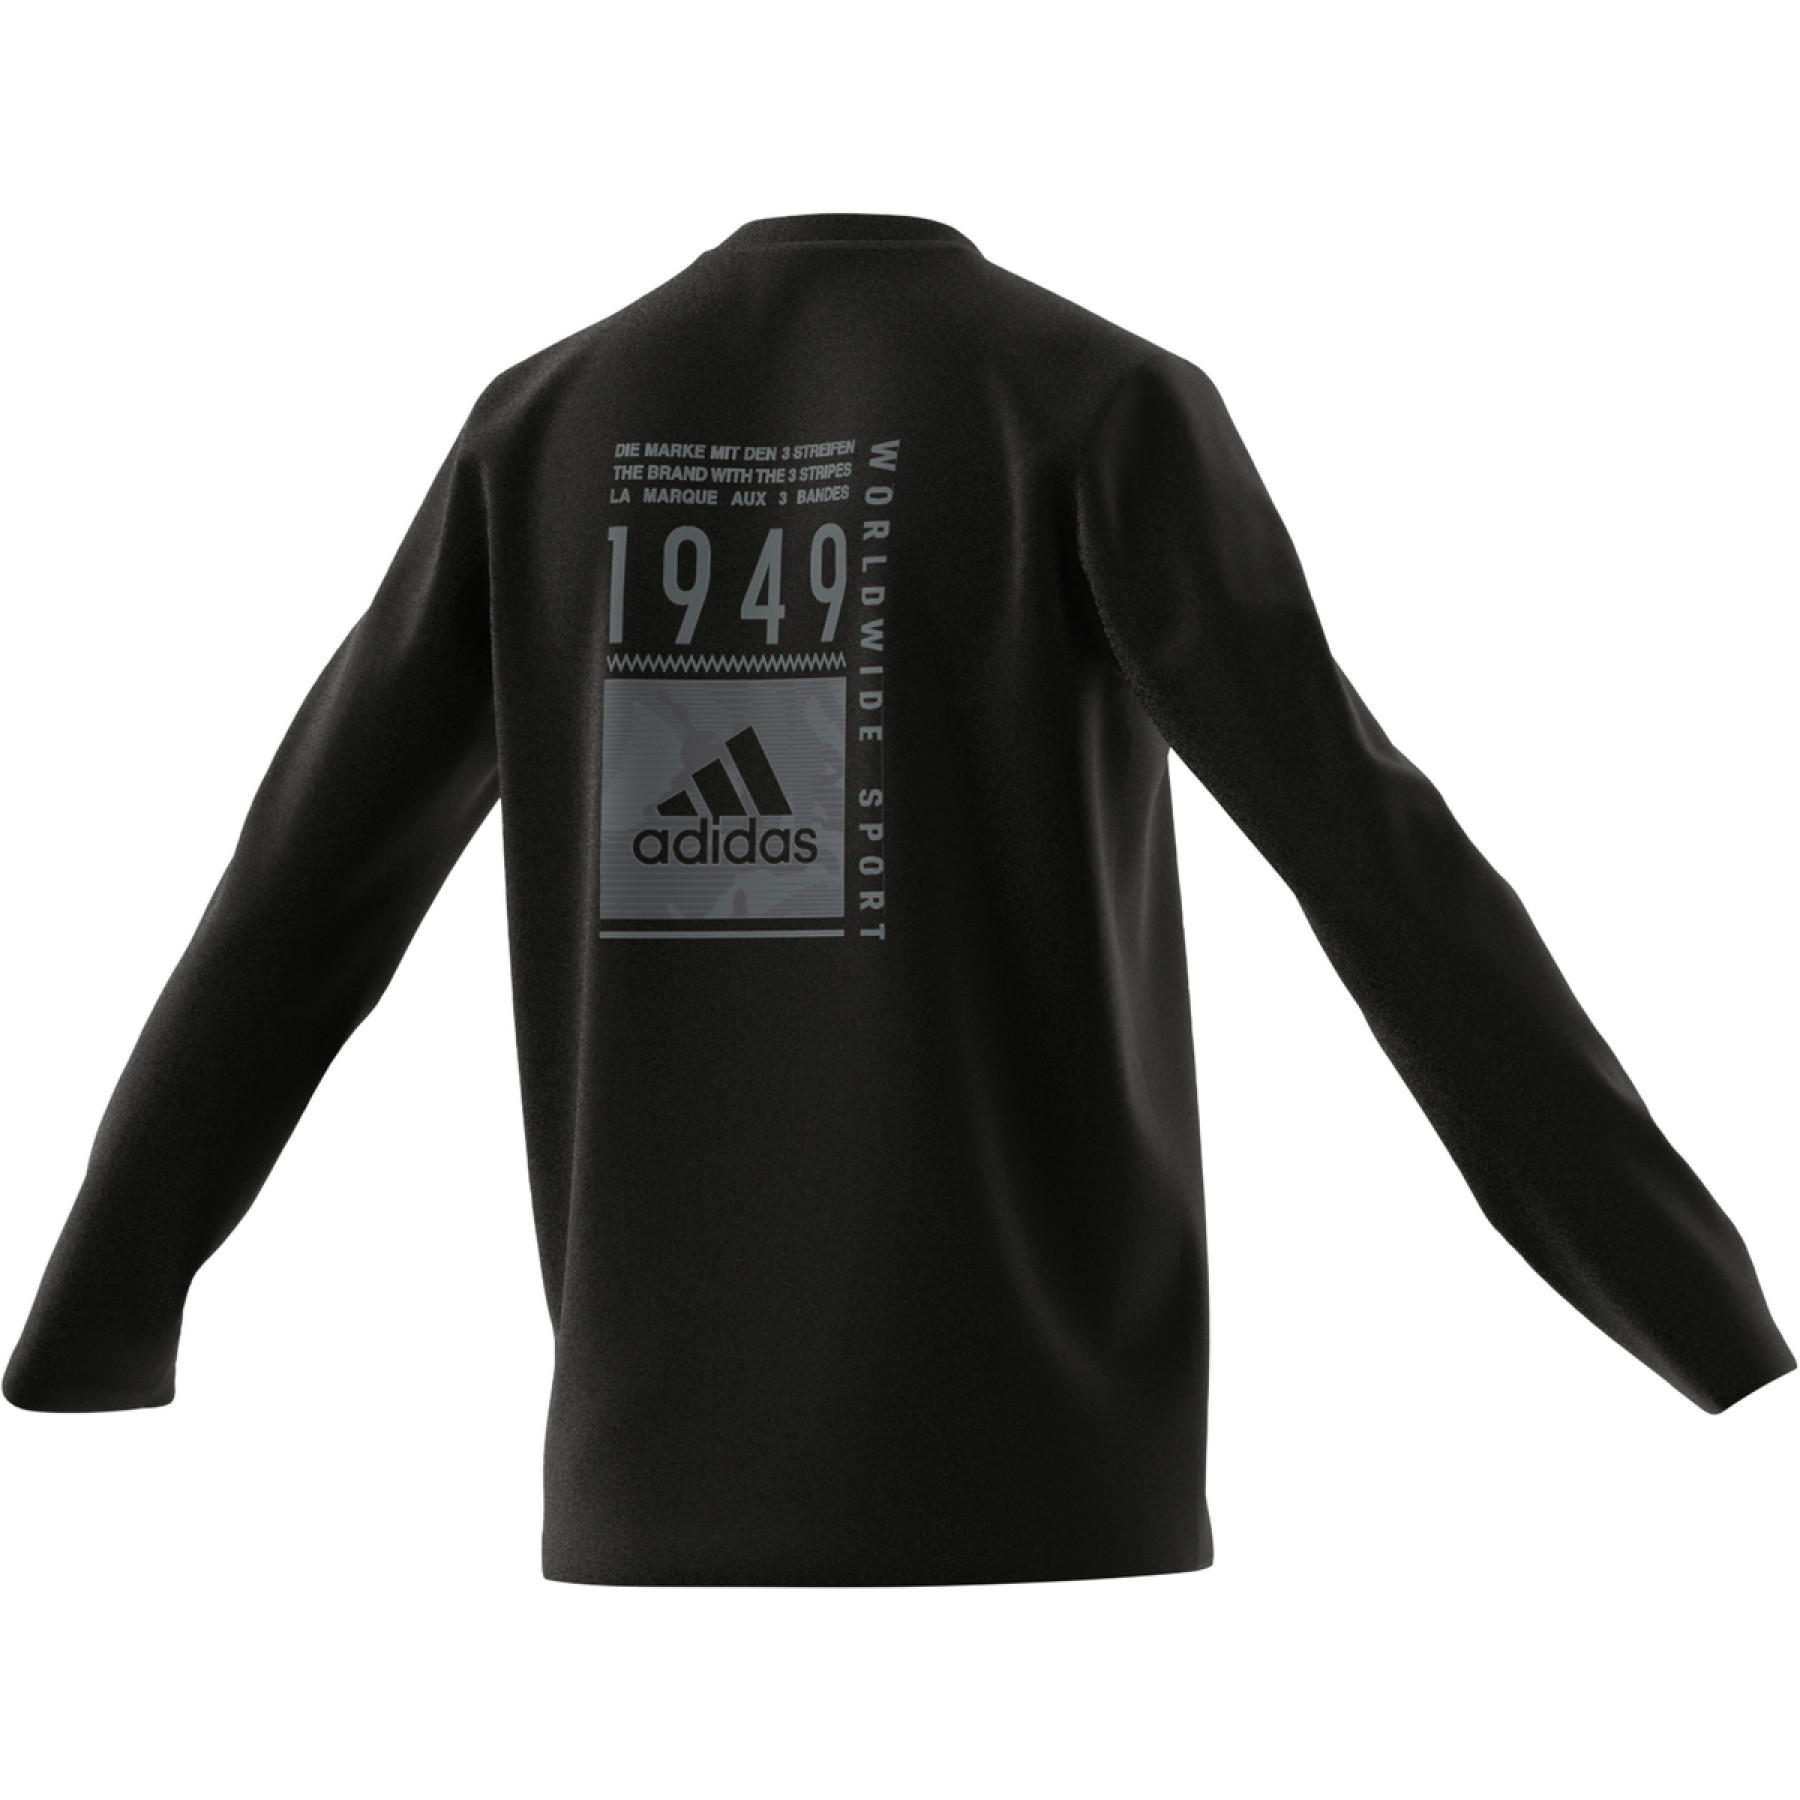 T-shirt adidas Worldwide Sport Front and Back Graphic